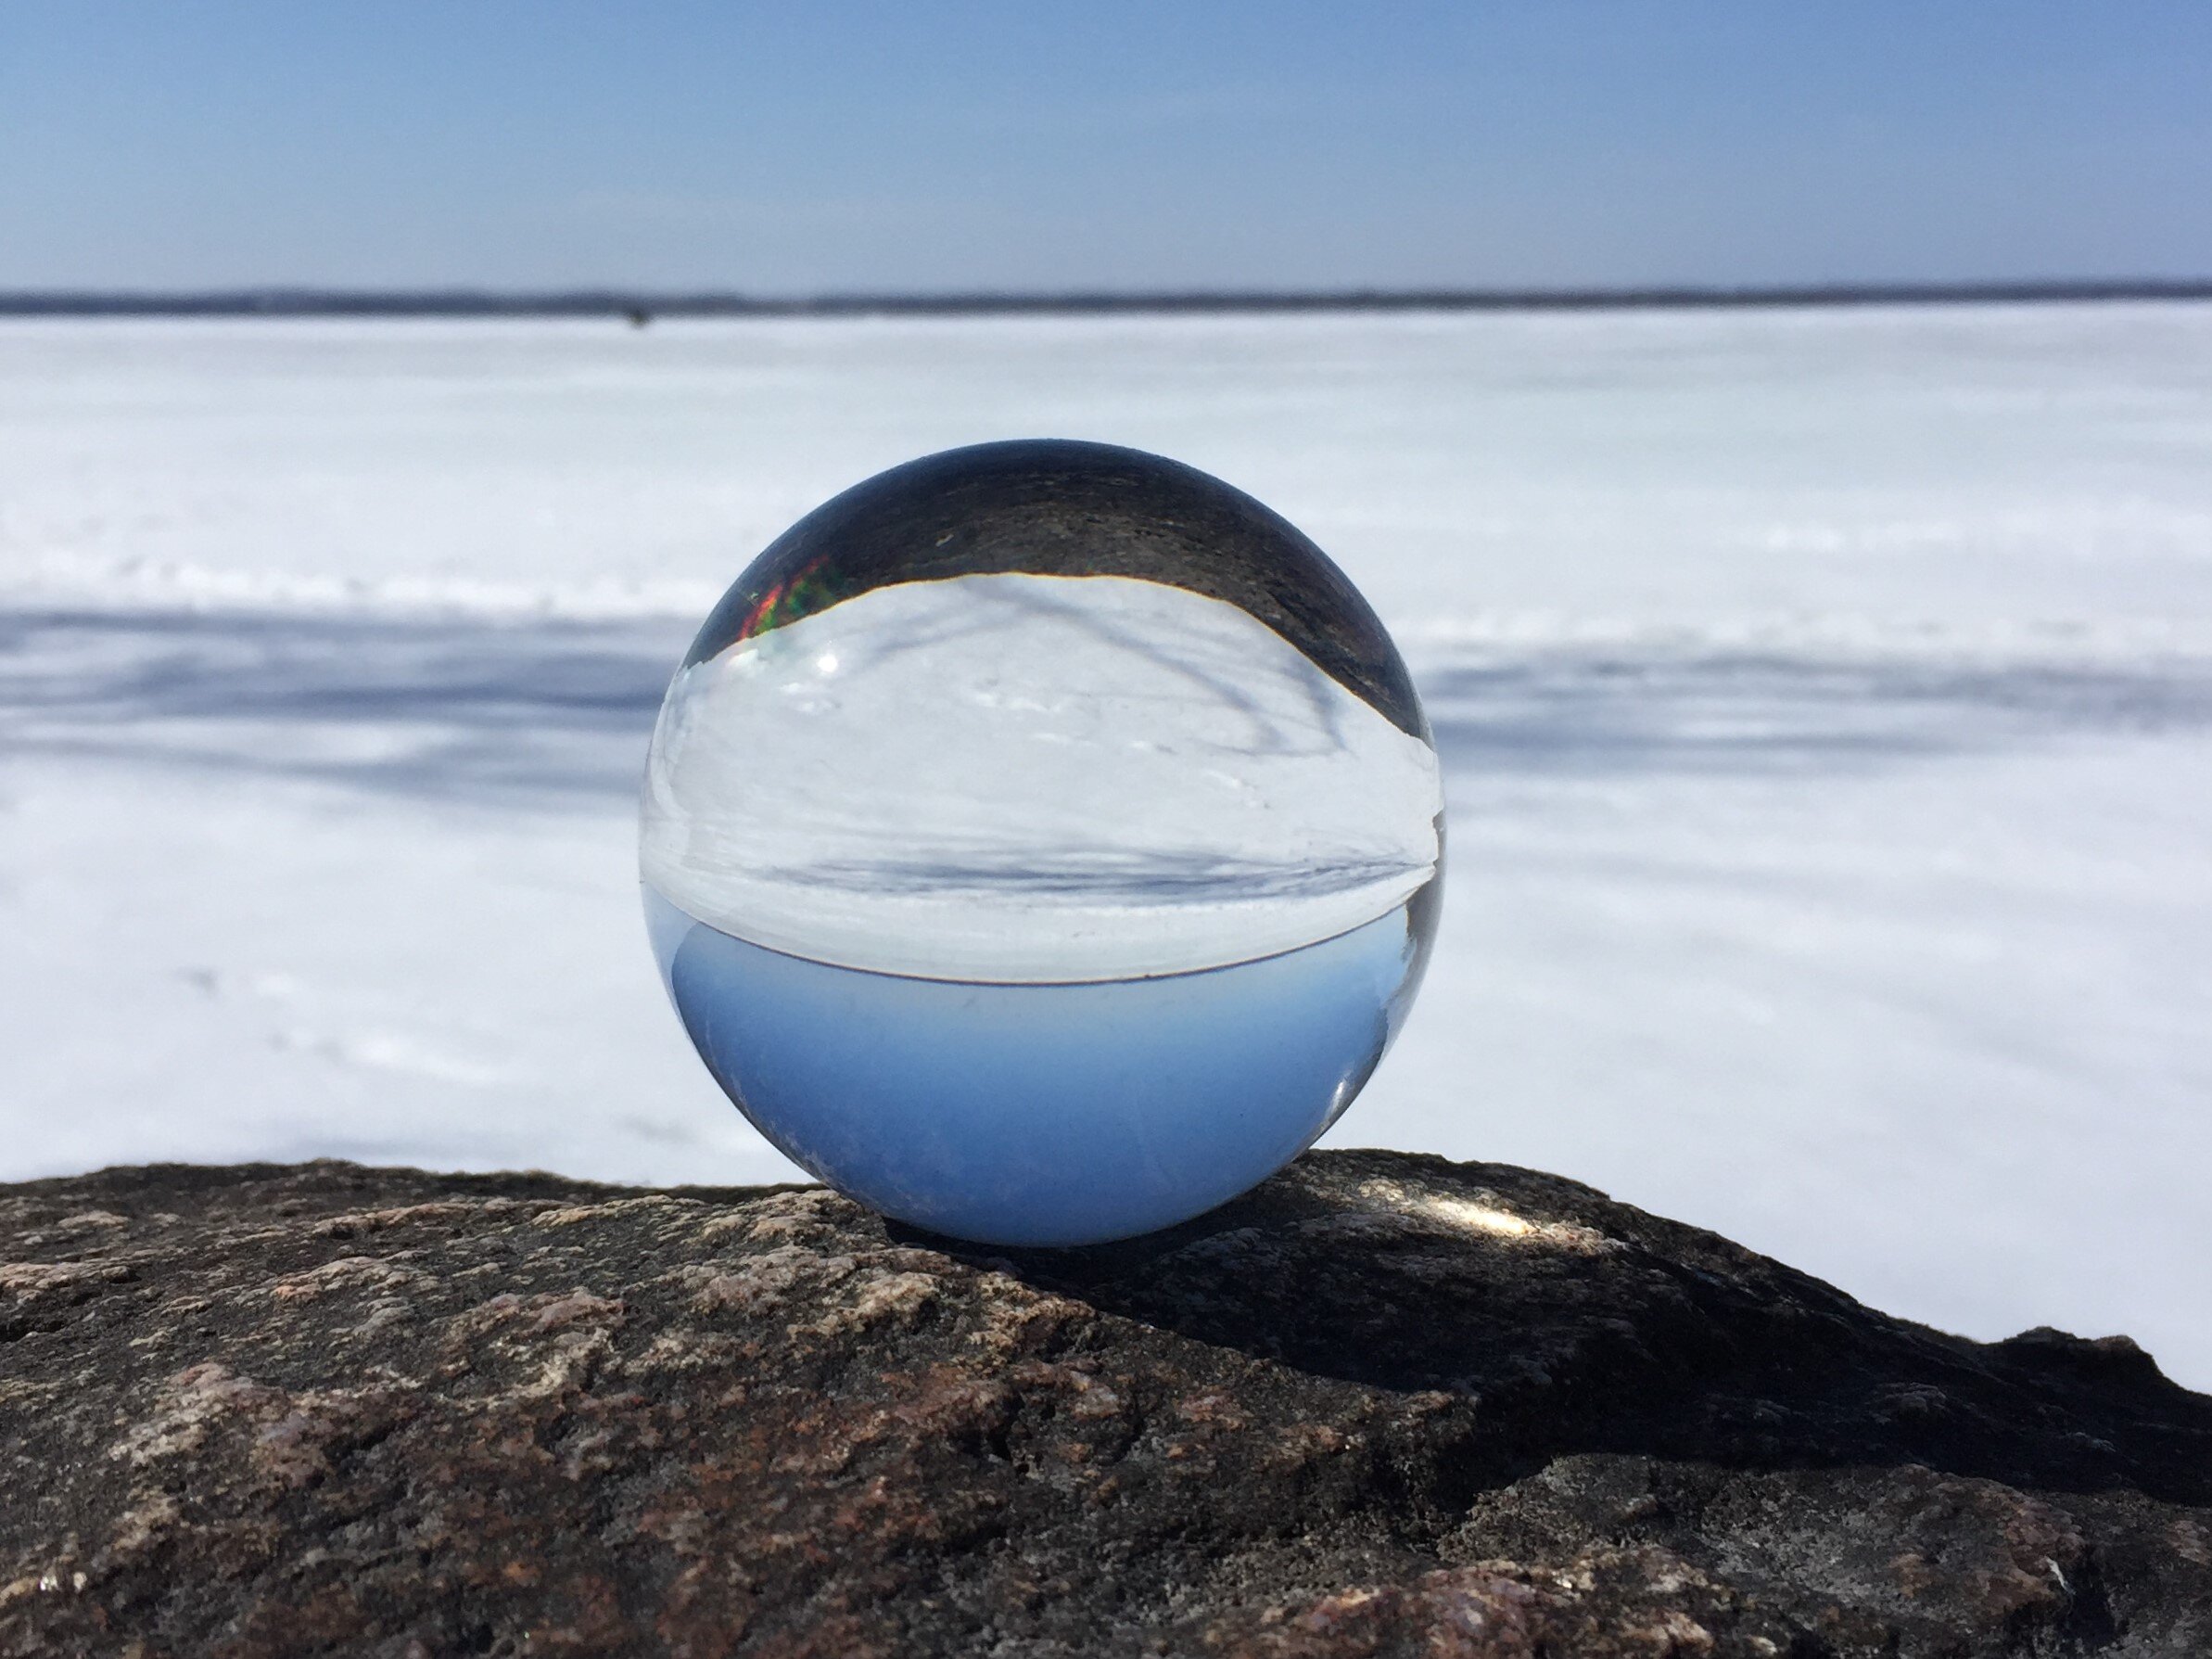 Lensball in March.